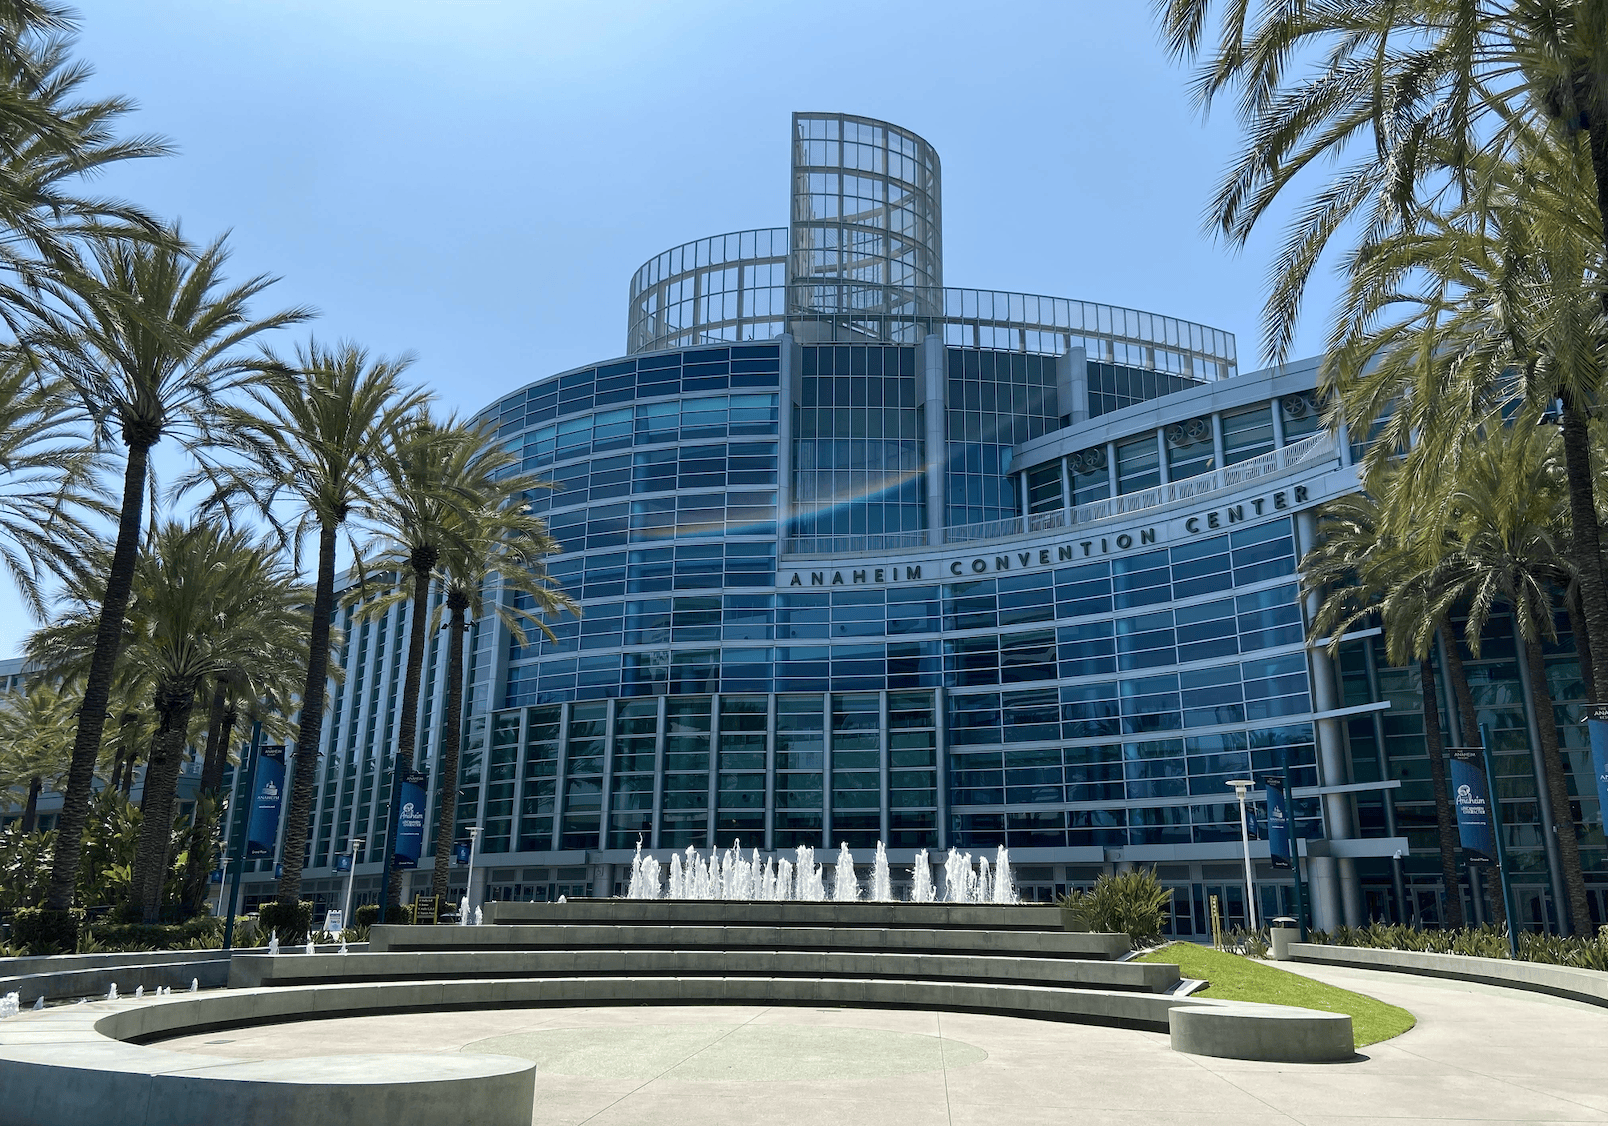 Entrance of Anaheim Convention Center (Photo Credit: Wikimedia Commons)